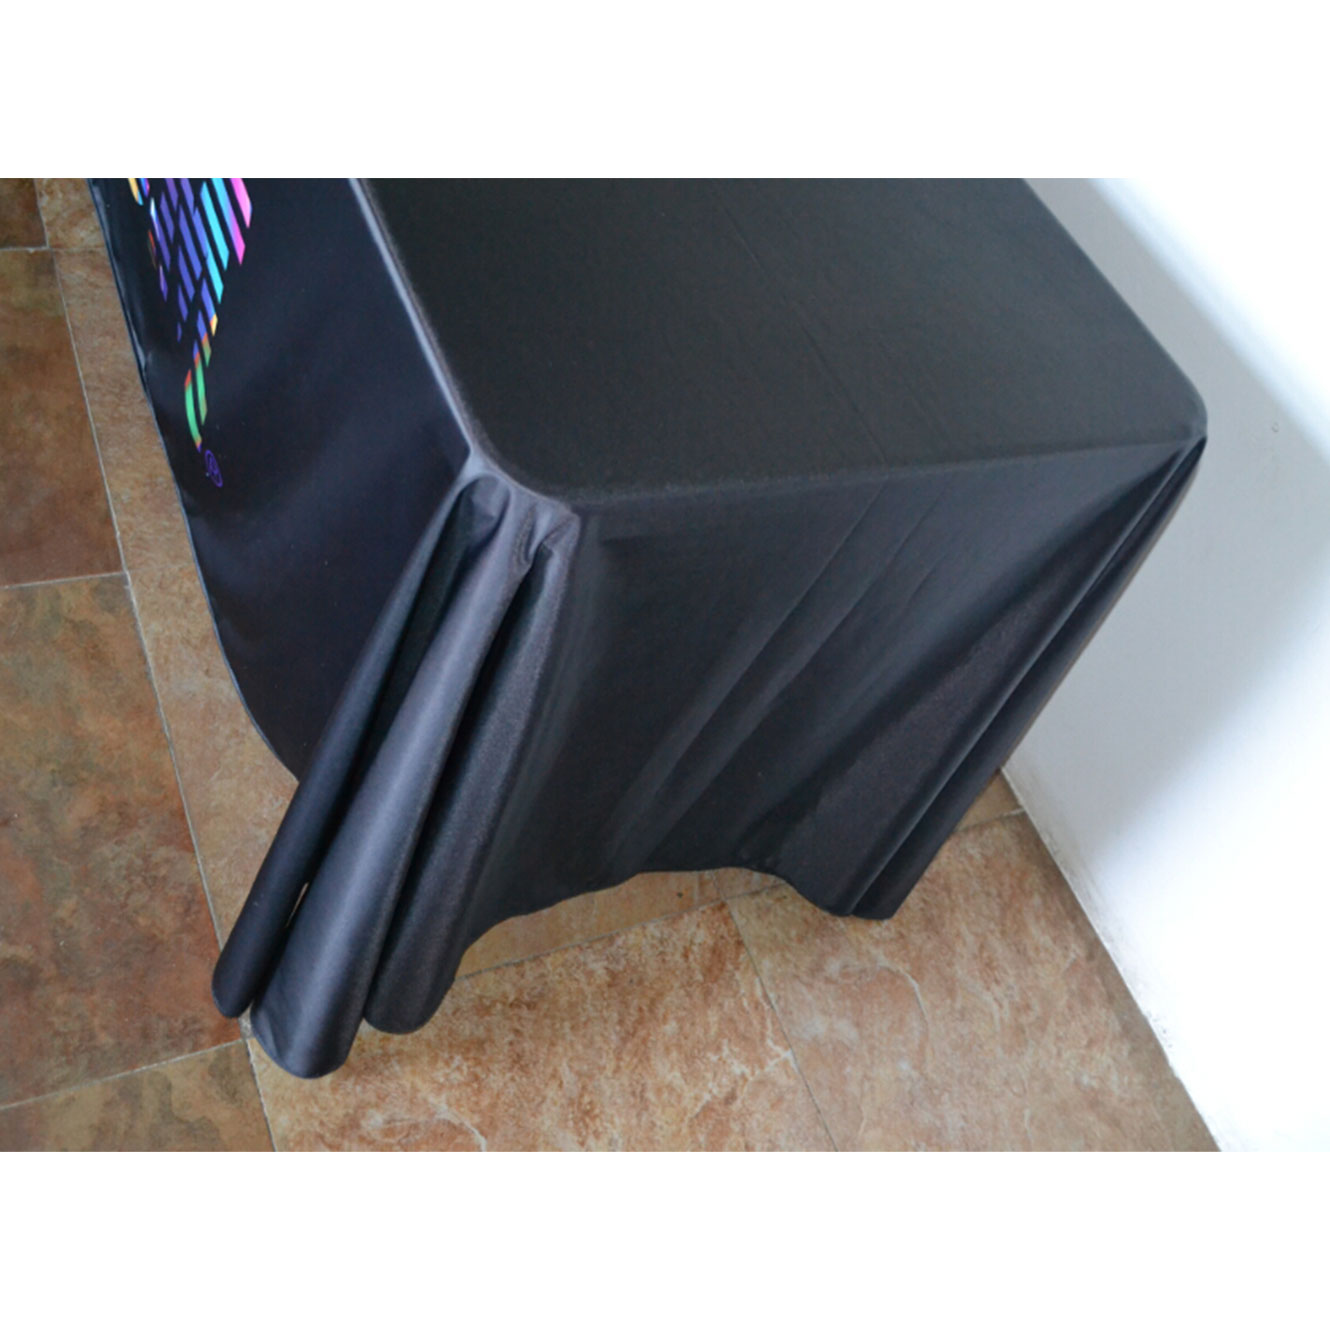 https://bigbanner.com.au/wp-content/uploads/2020/01/6ft-8ft-1-Sided-Deluxe-Printed-Fitted-Table-Throws-Covers-3.jpg